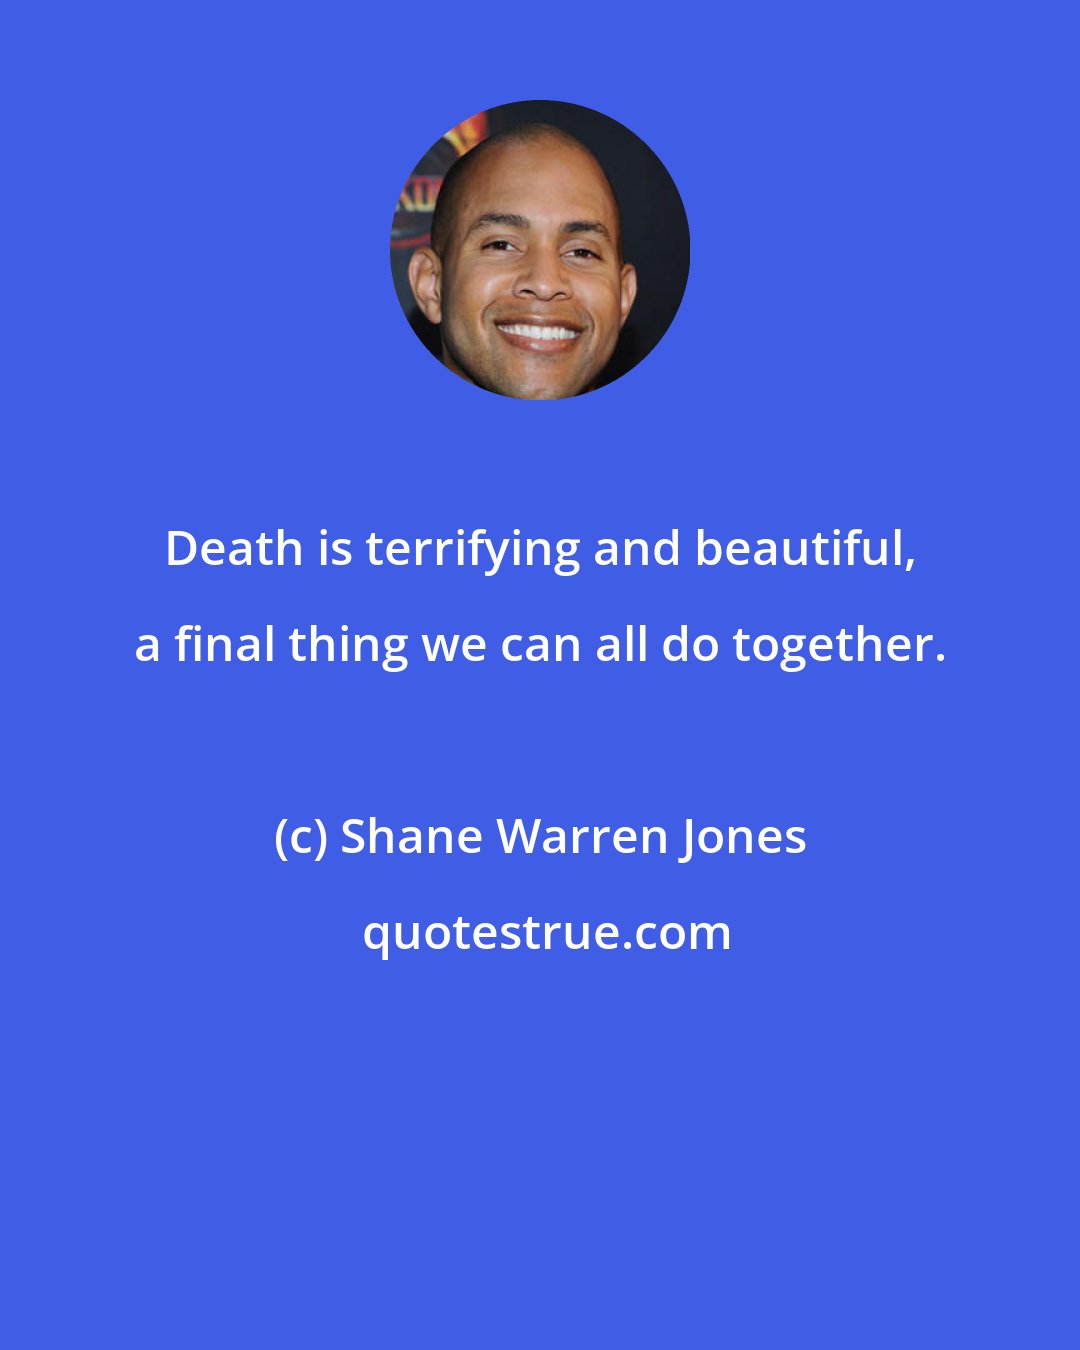 Shane Warren Jones: Death is terrifying and beautiful, a final thing we can all do together.